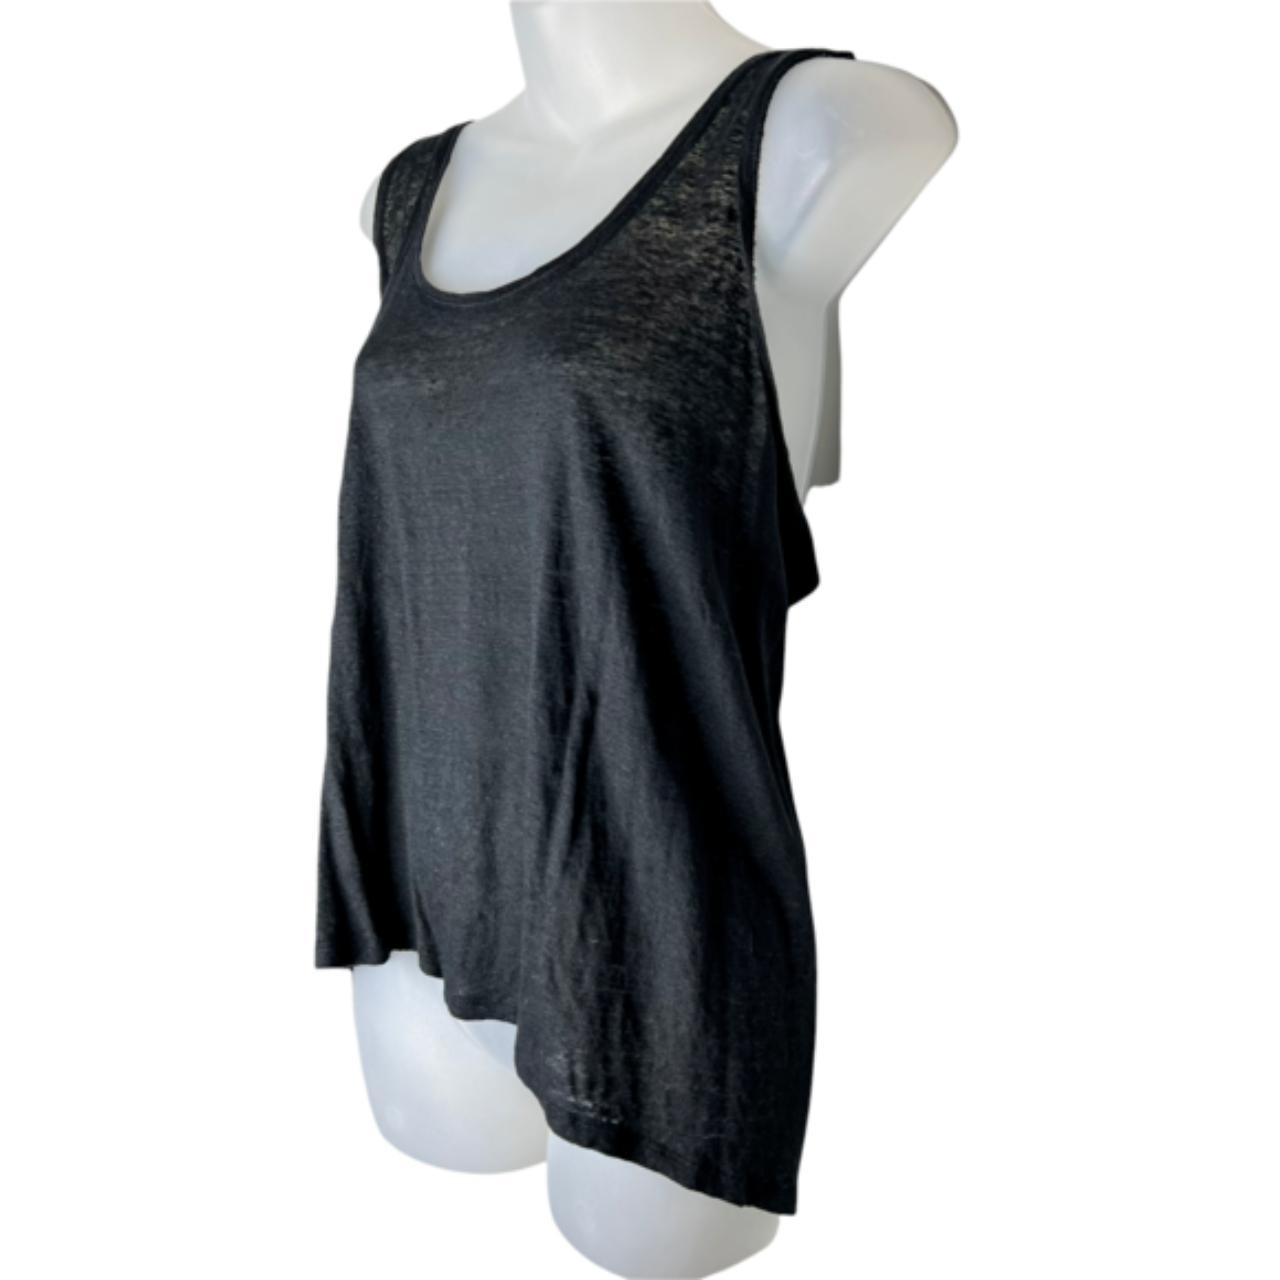 PAIGE Women's Black and White Vests-tanks-camis (4)